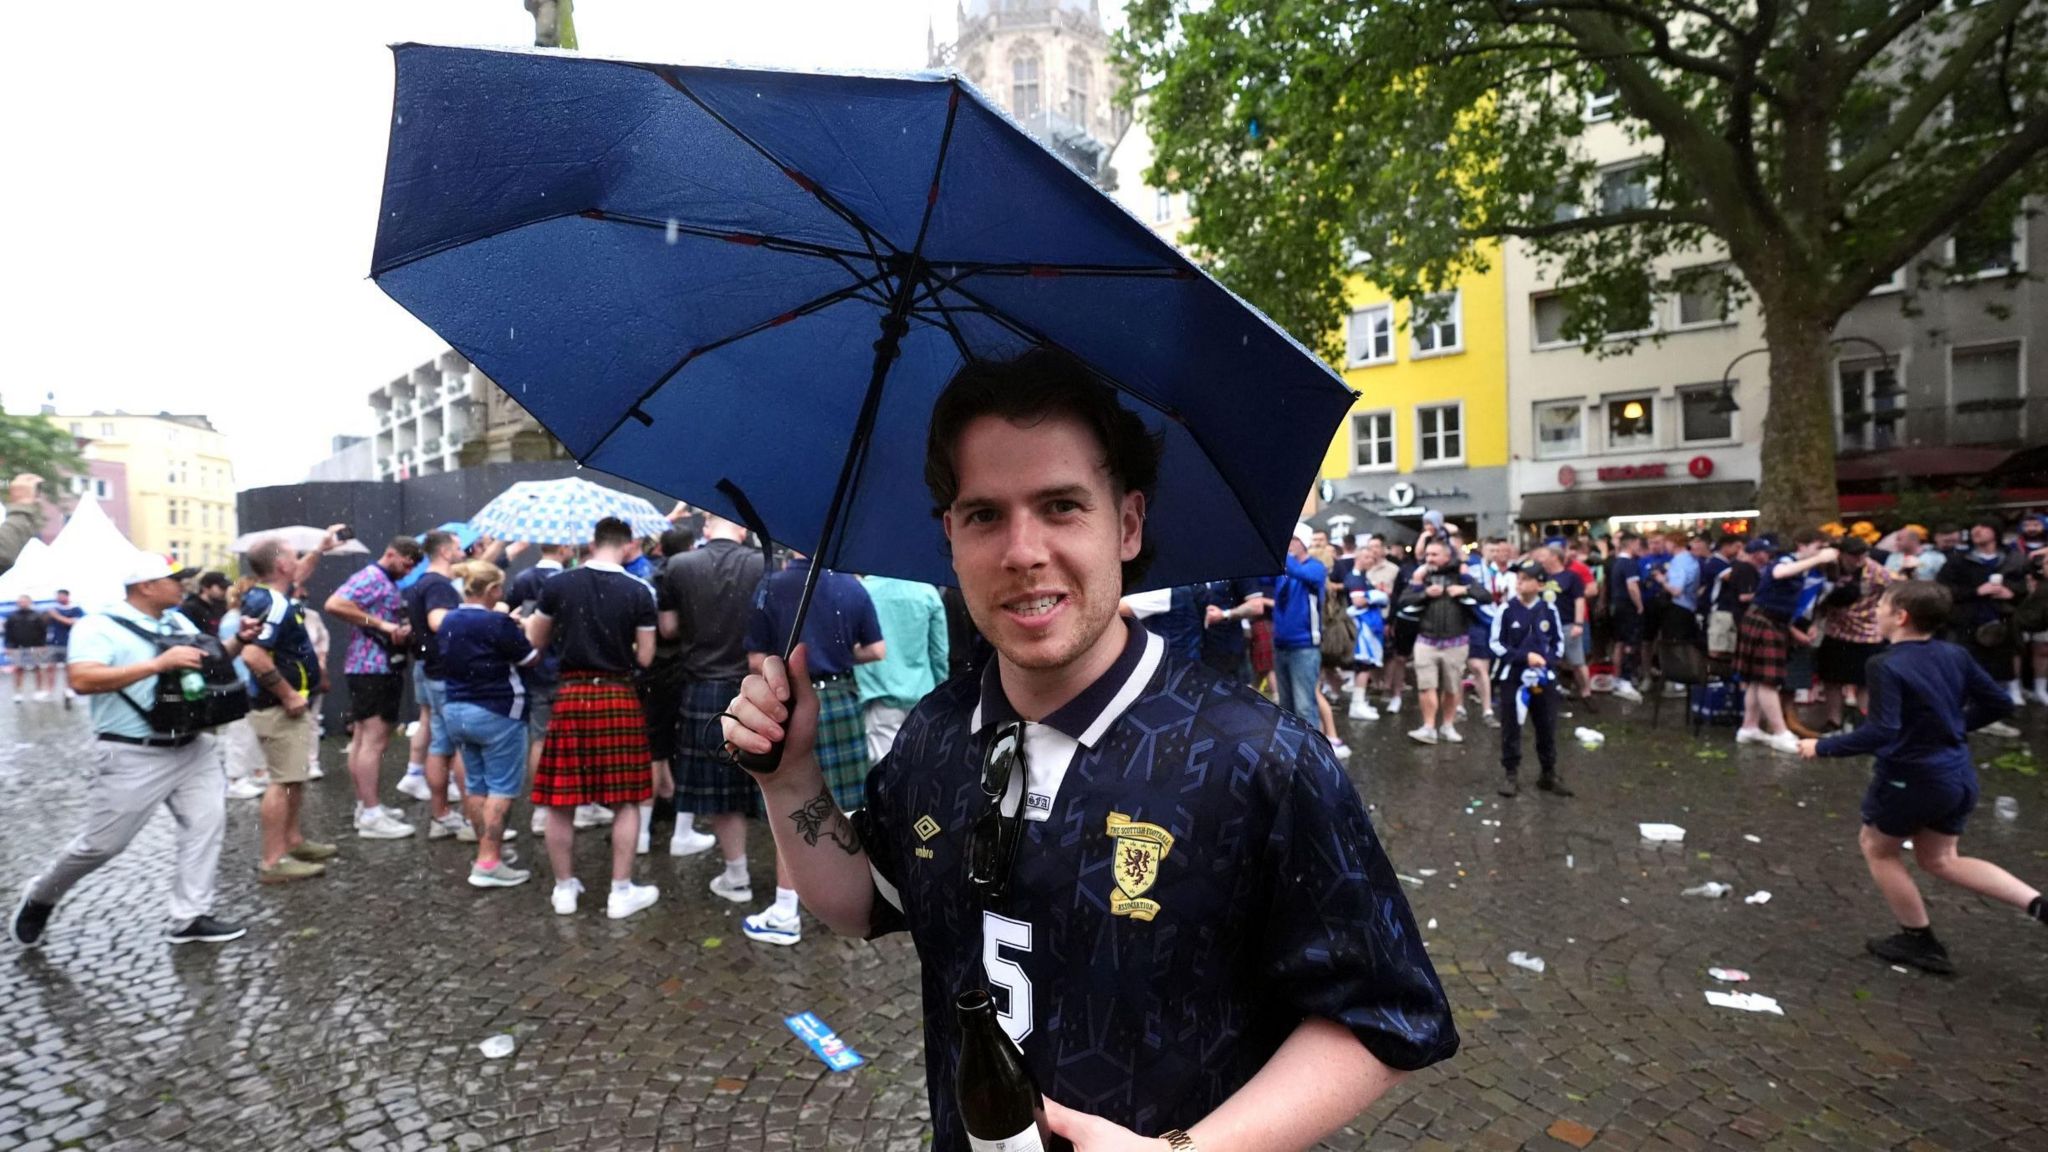 A Scotland fan holds an umbrella in Cologne during heavy rain